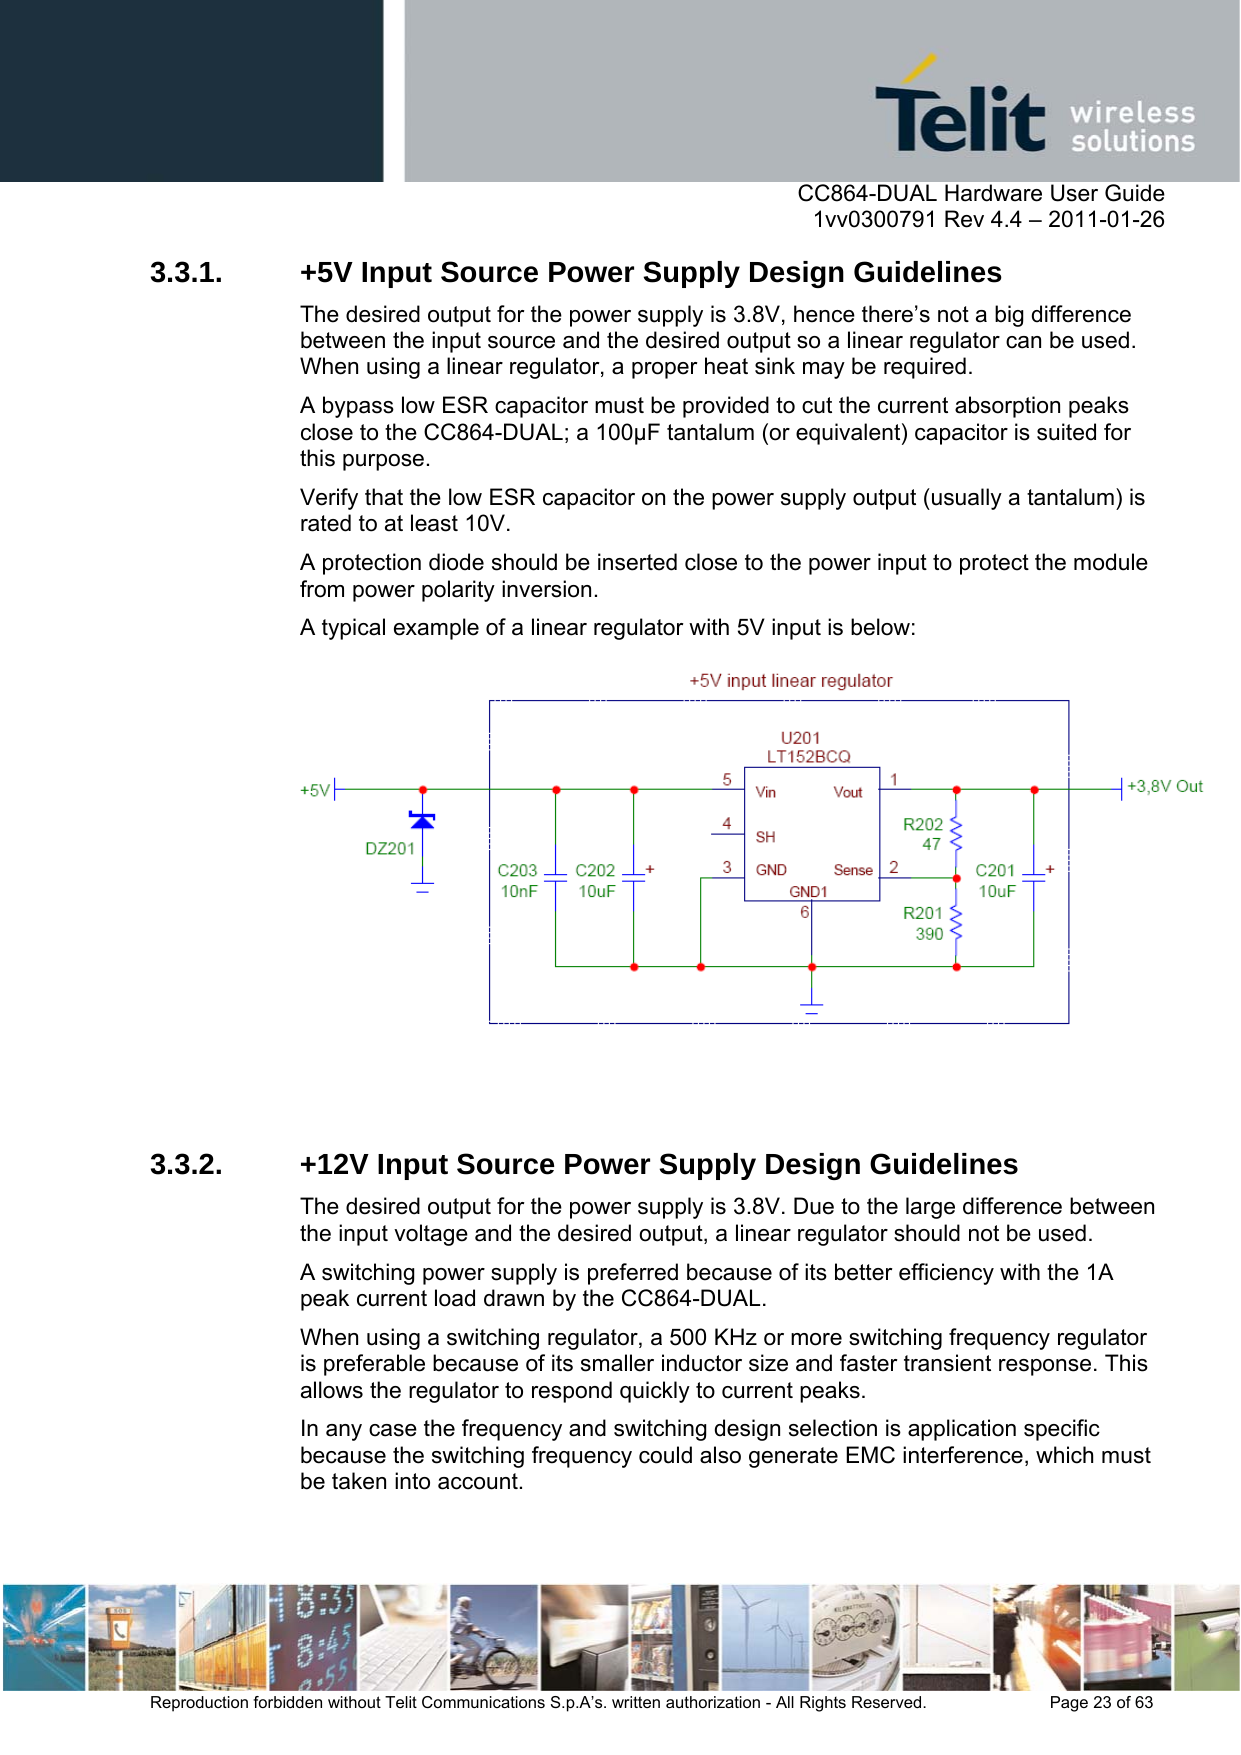      CC864-DUAL Hardware User Guide    1vv0300791 Rev 4.4 – 2011-01-26  Reproduction forbidden without Telit Communications S.p.A’s. written authorization - All Rights Reserved.    Page 23 of 63  3.3.1.  +5V Input Source Power Supply Design Guidelines The desired output for the power supply is 3.8V, hence there’s not a big difference between the input source and the desired output so a linear regulator can be used. When using a linear regulator, a proper heat sink may be required. A bypass low ESR capacitor must be provided to cut the current absorption peaks close to the CC864-DUAL; a 100µF tantalum (or equivalent) capacitor is suited for this purpose.  Verify that the low ESR capacitor on the power supply output (usually a tantalum) is rated to at least 10V. A protection diode should be inserted close to the power input to protect the module from power polarity inversion.  A typical example of a linear regulator with 5V input is below:    3.3.2.  +12V Input Source Power Supply Design Guidelines The desired output for the power supply is 3.8V. Due to the large difference between the input voltage and the desired output, a linear regulator should not be used.  A switching power supply is preferred because of its better efficiency with the 1A peak current load drawn by the CC864-DUAL. When using a switching regulator, a 500 KHz or more switching frequency regulator is preferable because of its smaller inductor size and faster transient response. This allows the regulator to respond quickly to current peaks. In any case the frequency and switching design selection is application specific because the switching frequency could also generate EMC interference, which must be taken into account. 